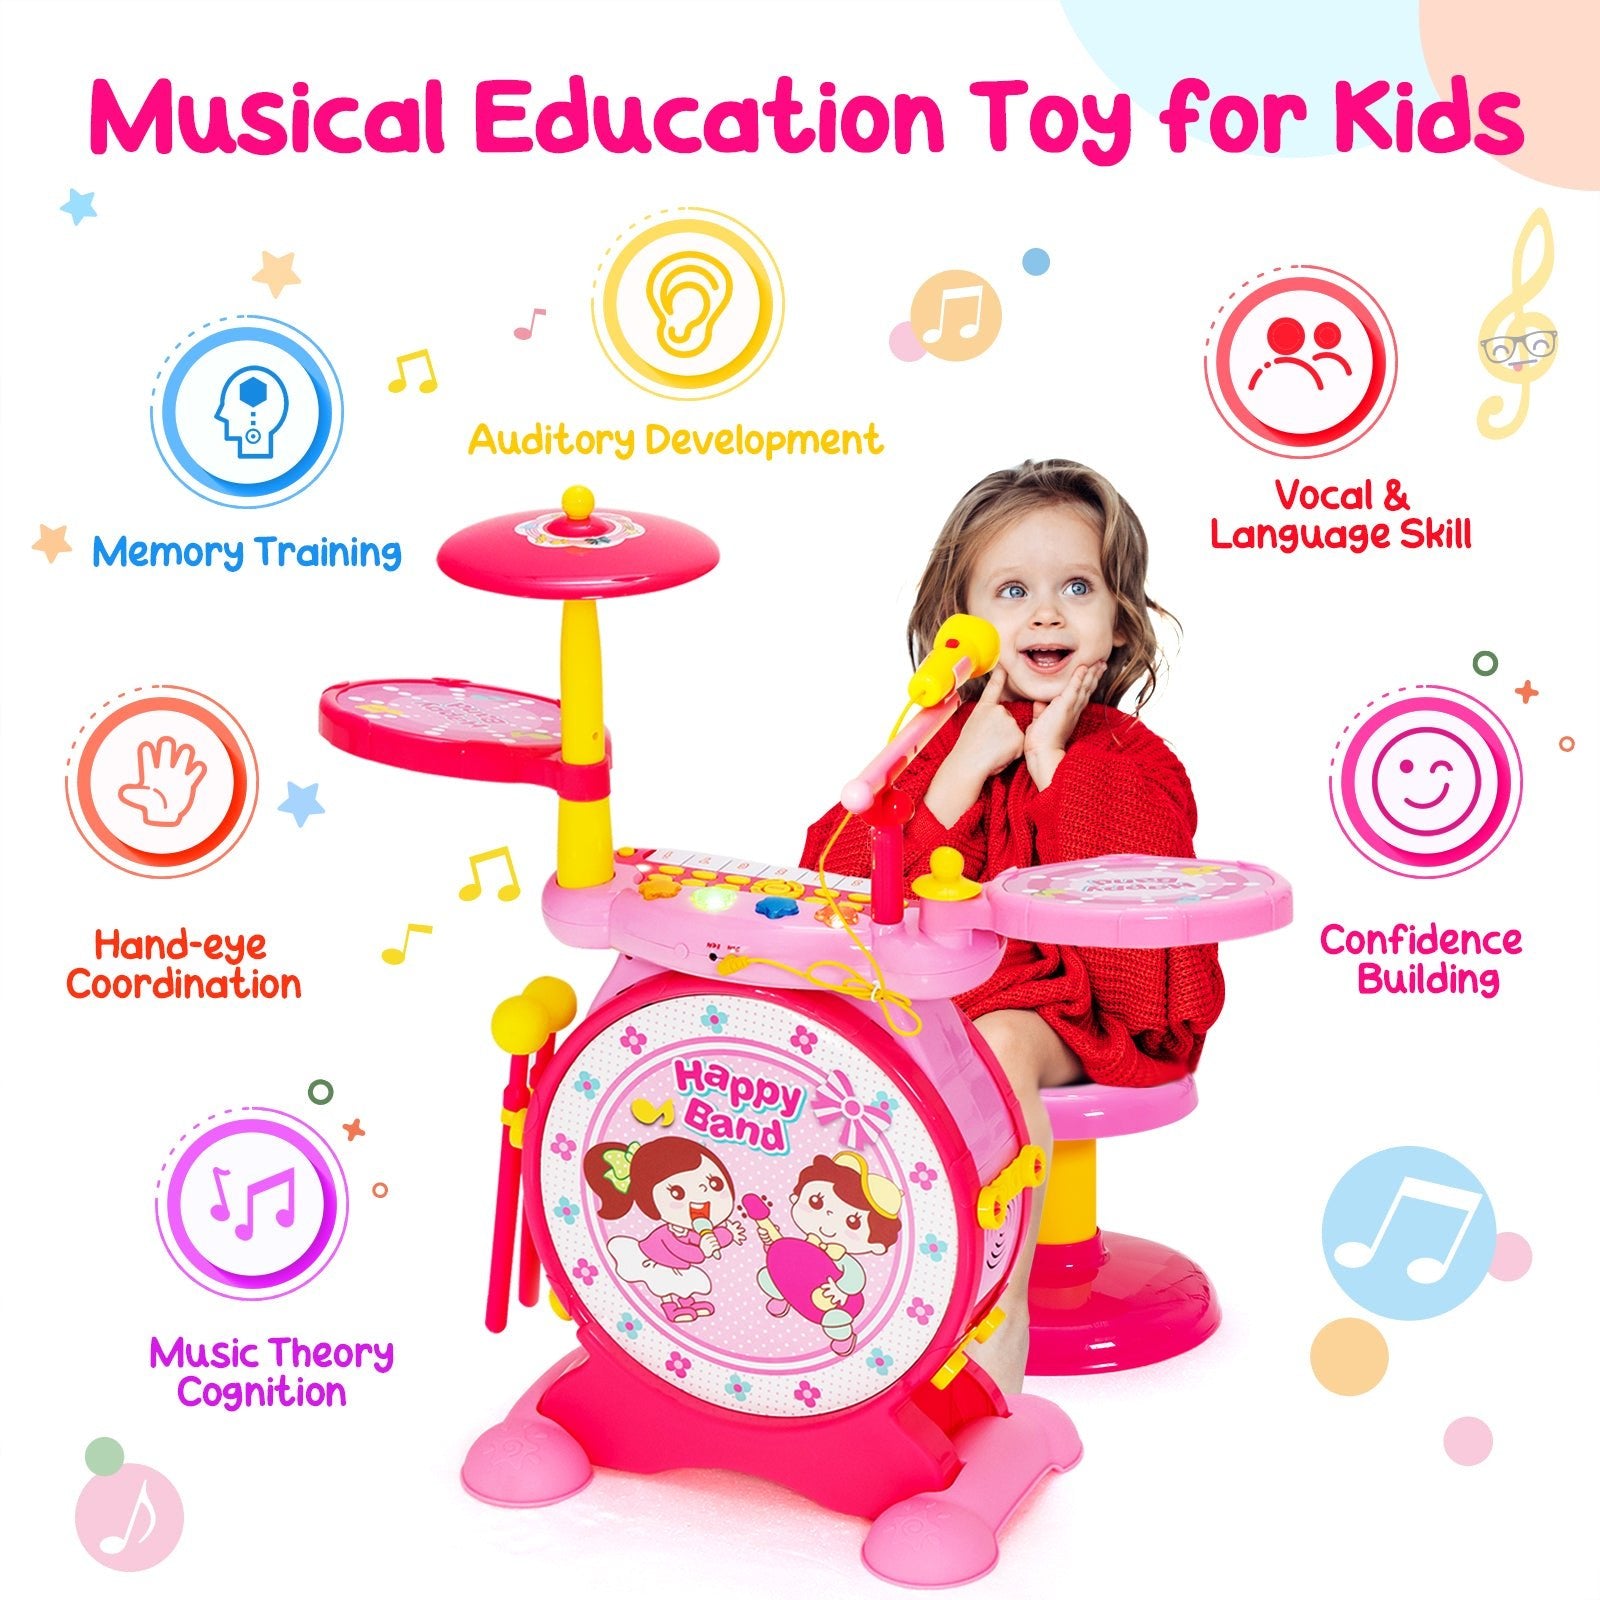 Stimulating Children's Electronic Drum Kit - 2-in-1 Toy with Keyboard & Mic